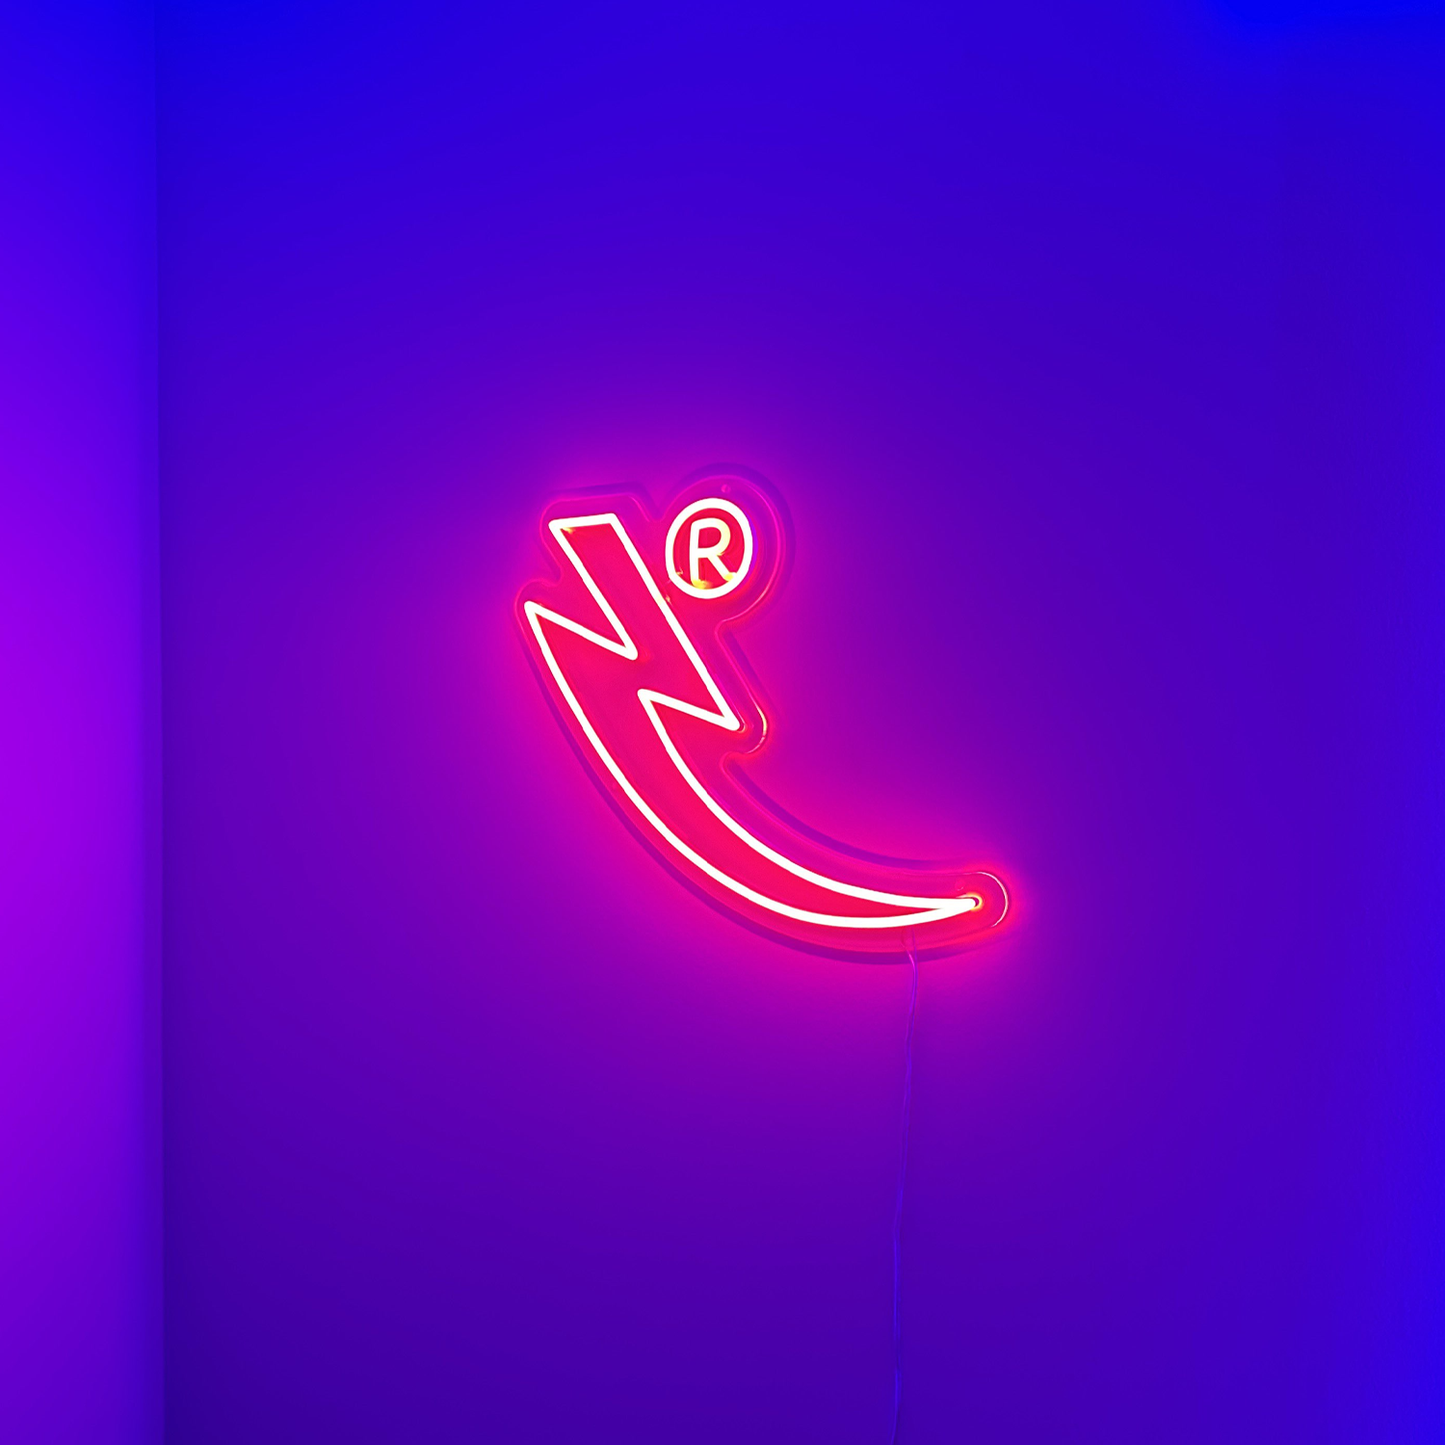 LIMITED RSG NEON SIGN